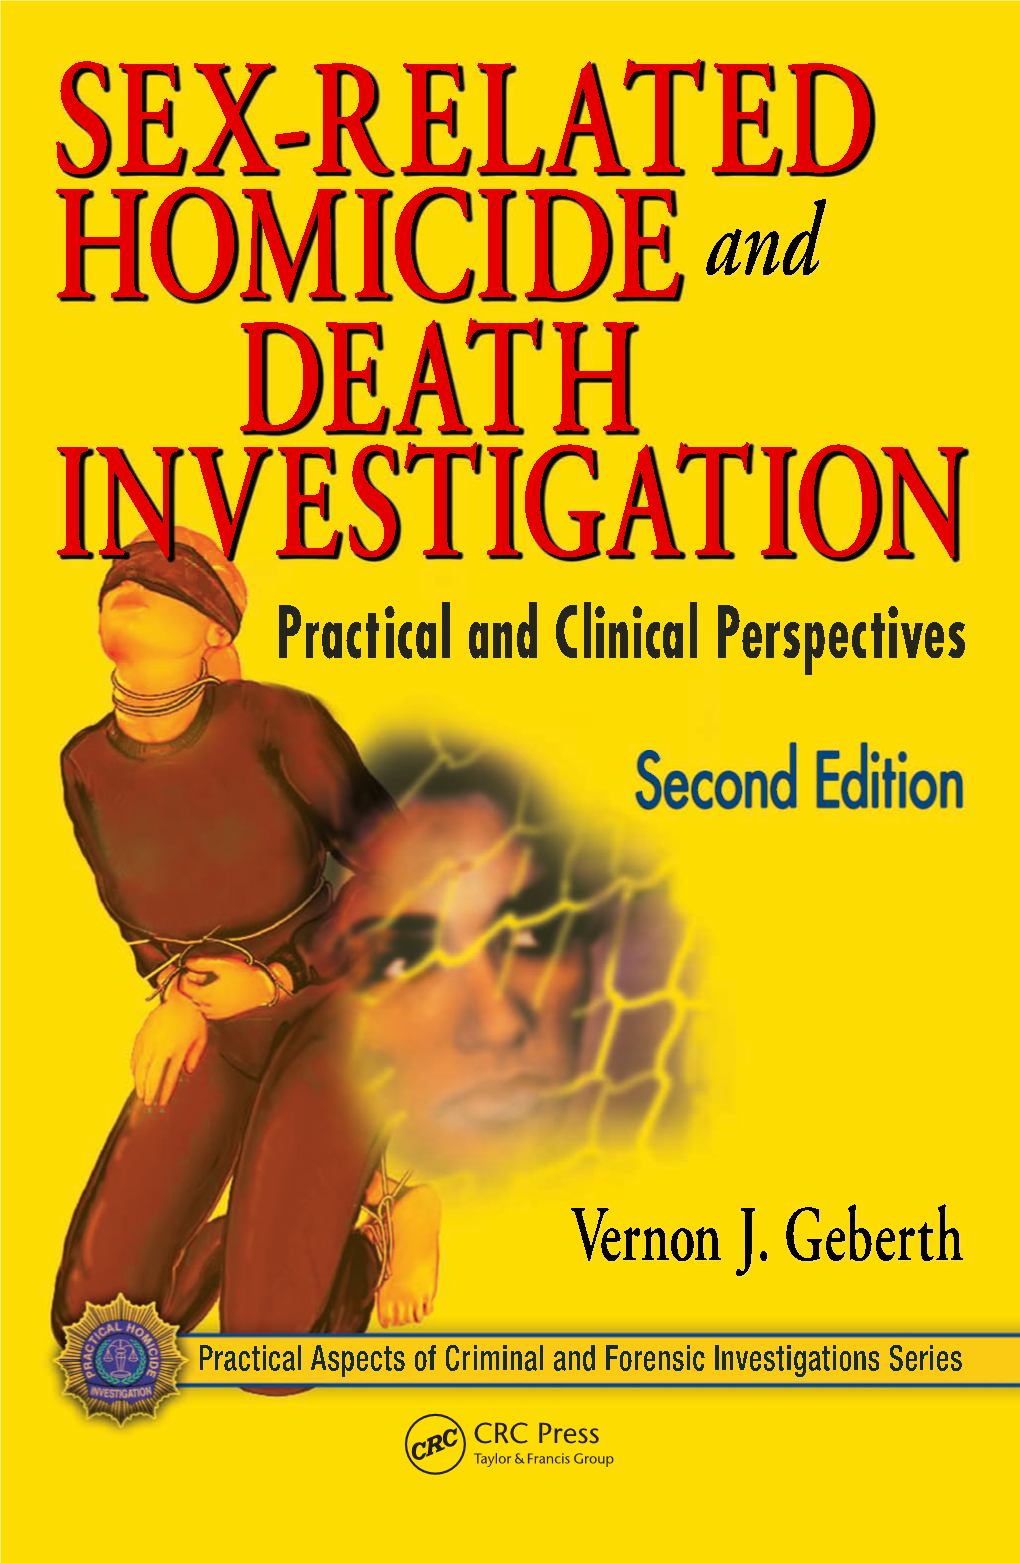 Sex-Related Homicide and Death Investigation